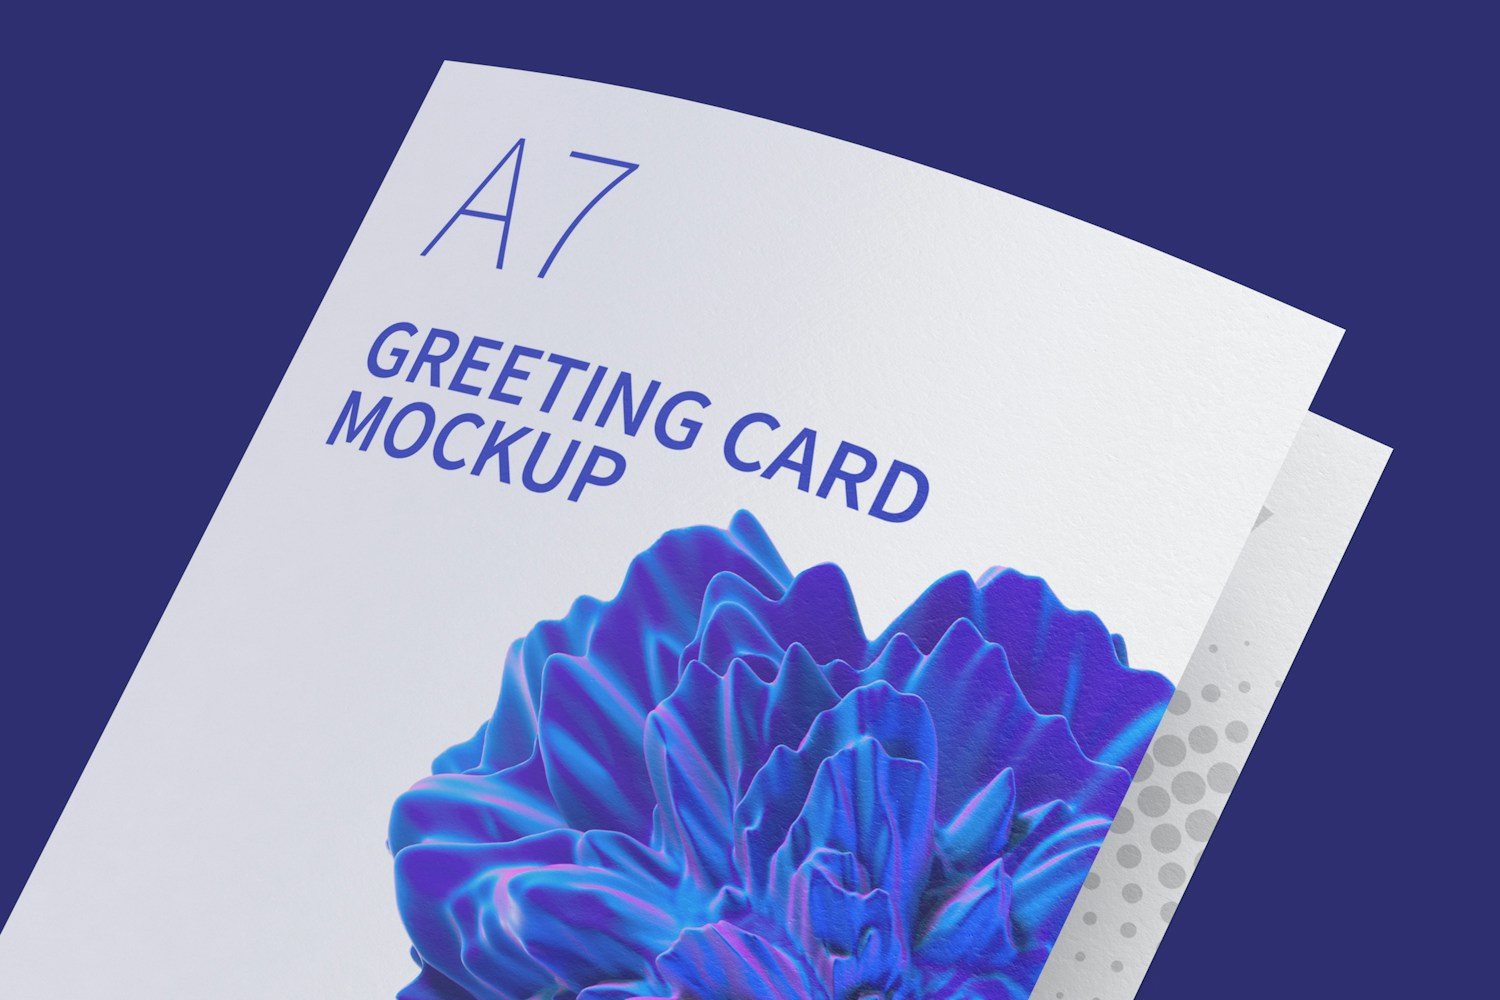 A7 Greeting Card Mockup, Closed, Left View